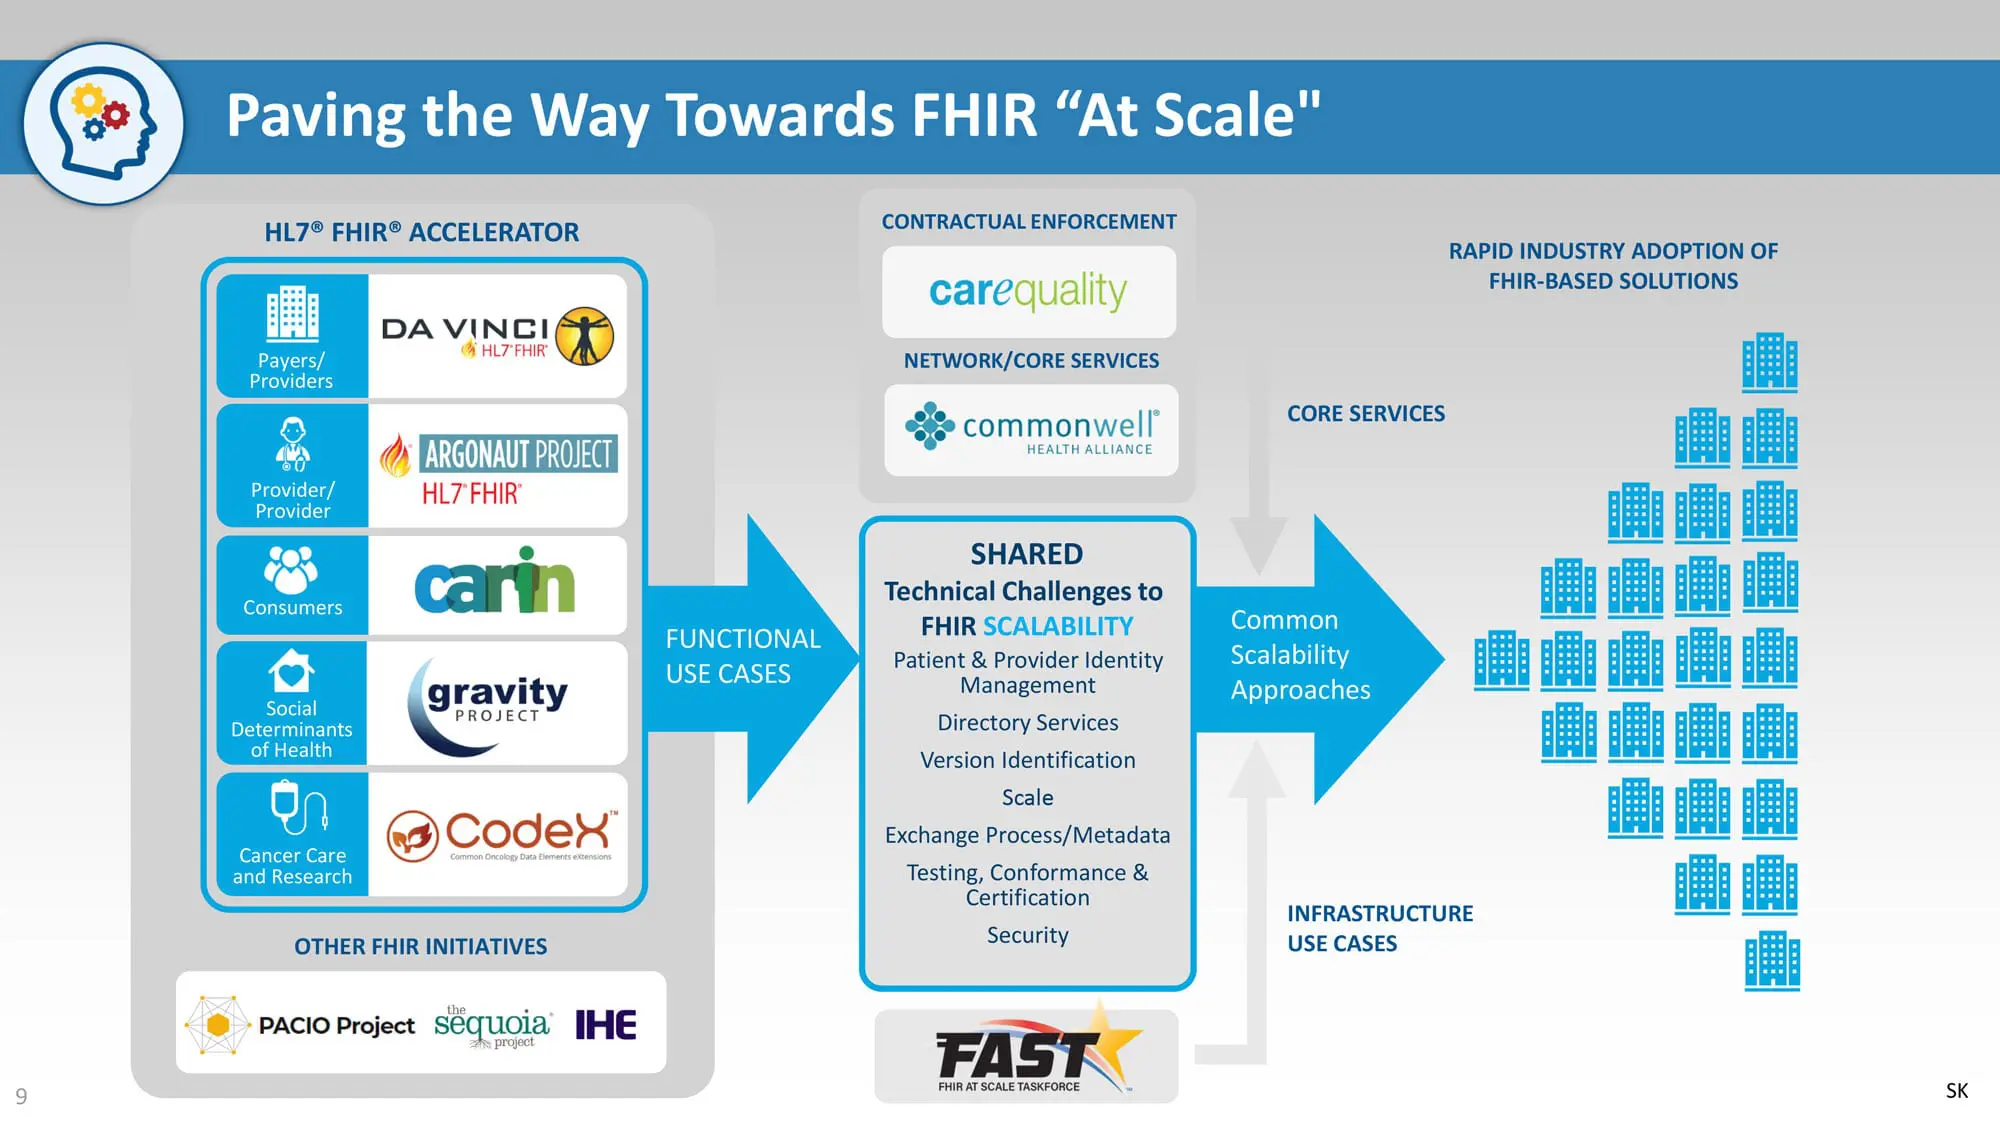 FHIR at scale